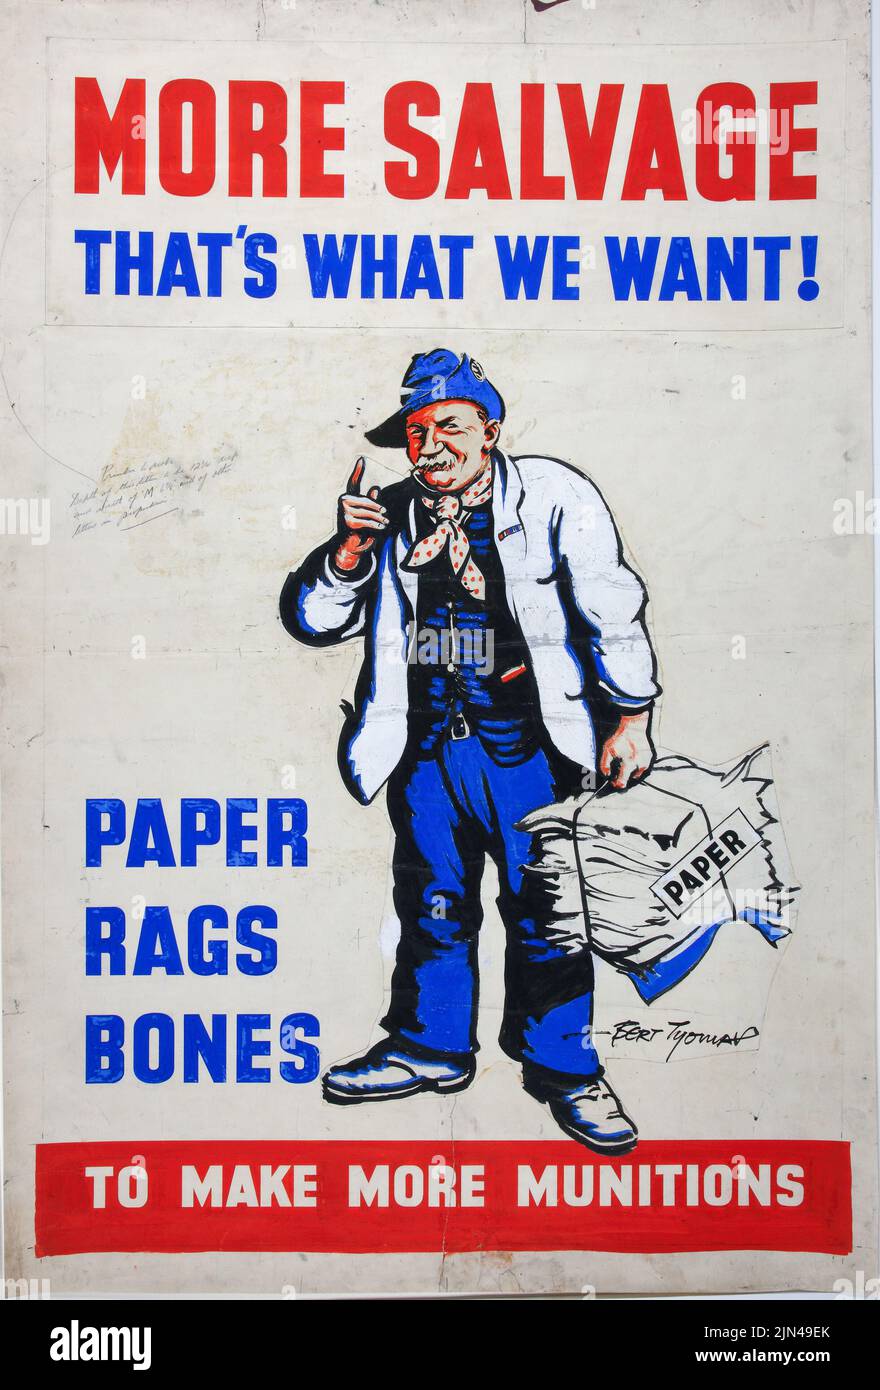 More salvage – thats what we want. Paper, rags, bones to make more munitions (1939 - 1946) British World War II era poster by Bert Thomas Stock Photo